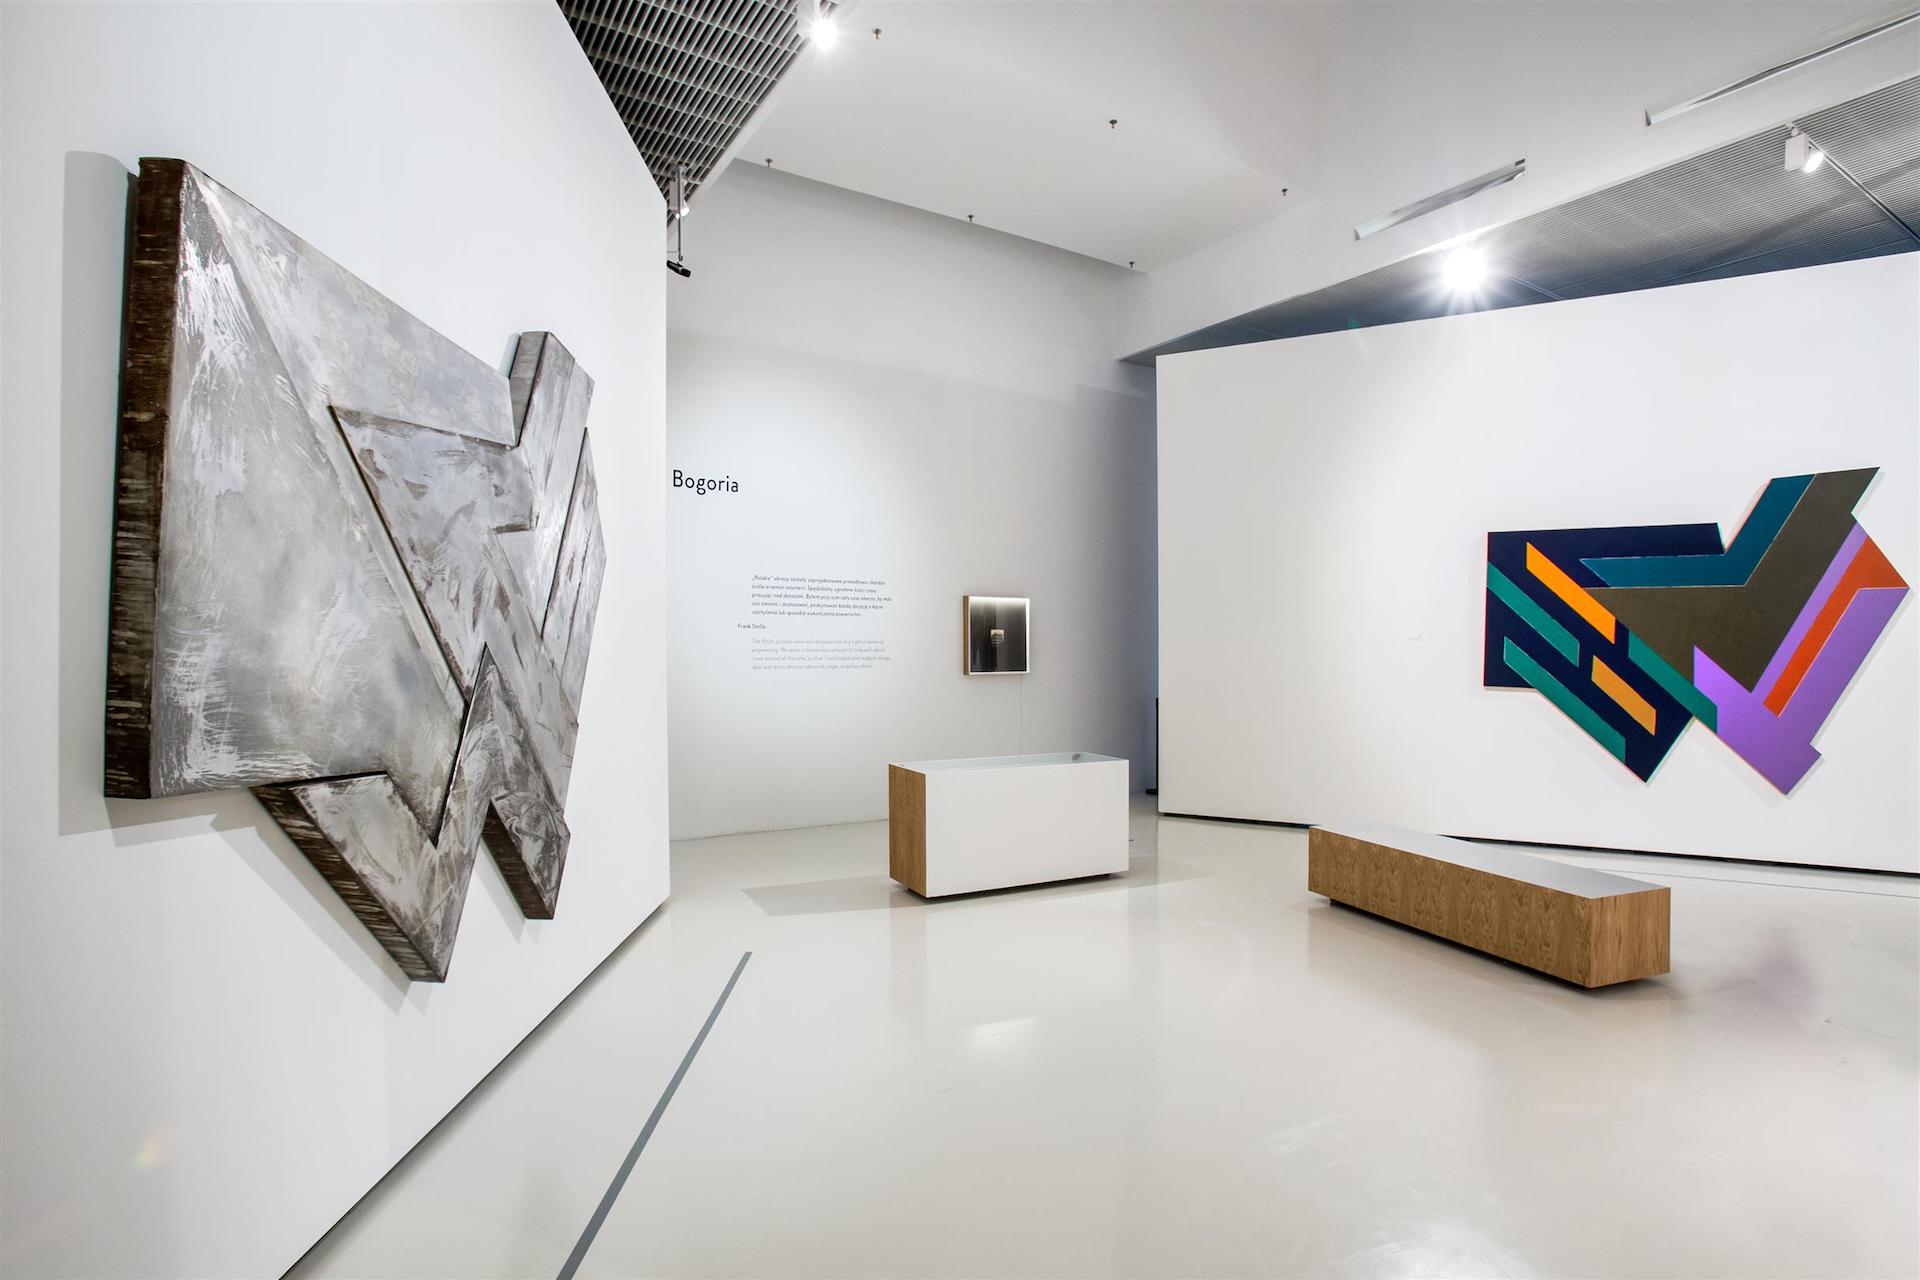 Frank Stella and Synagogues of Historic Poland